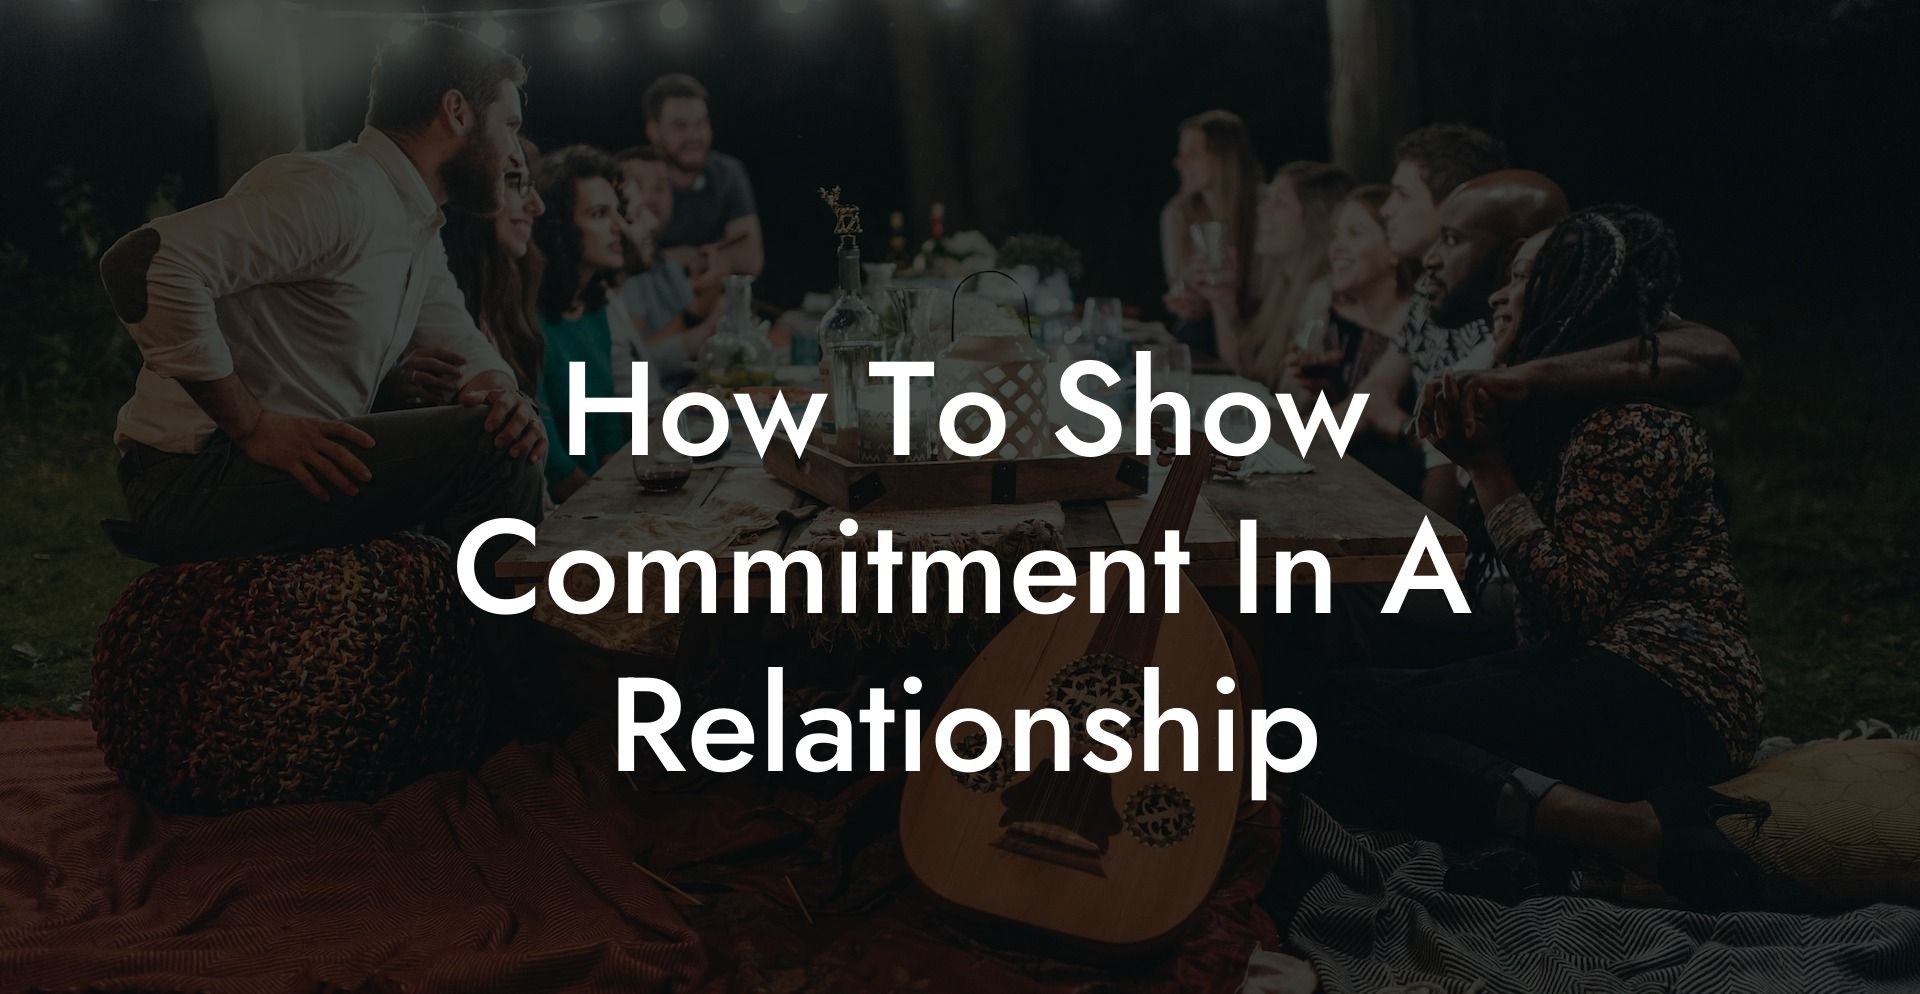 How To Show Commitment In A Relationship